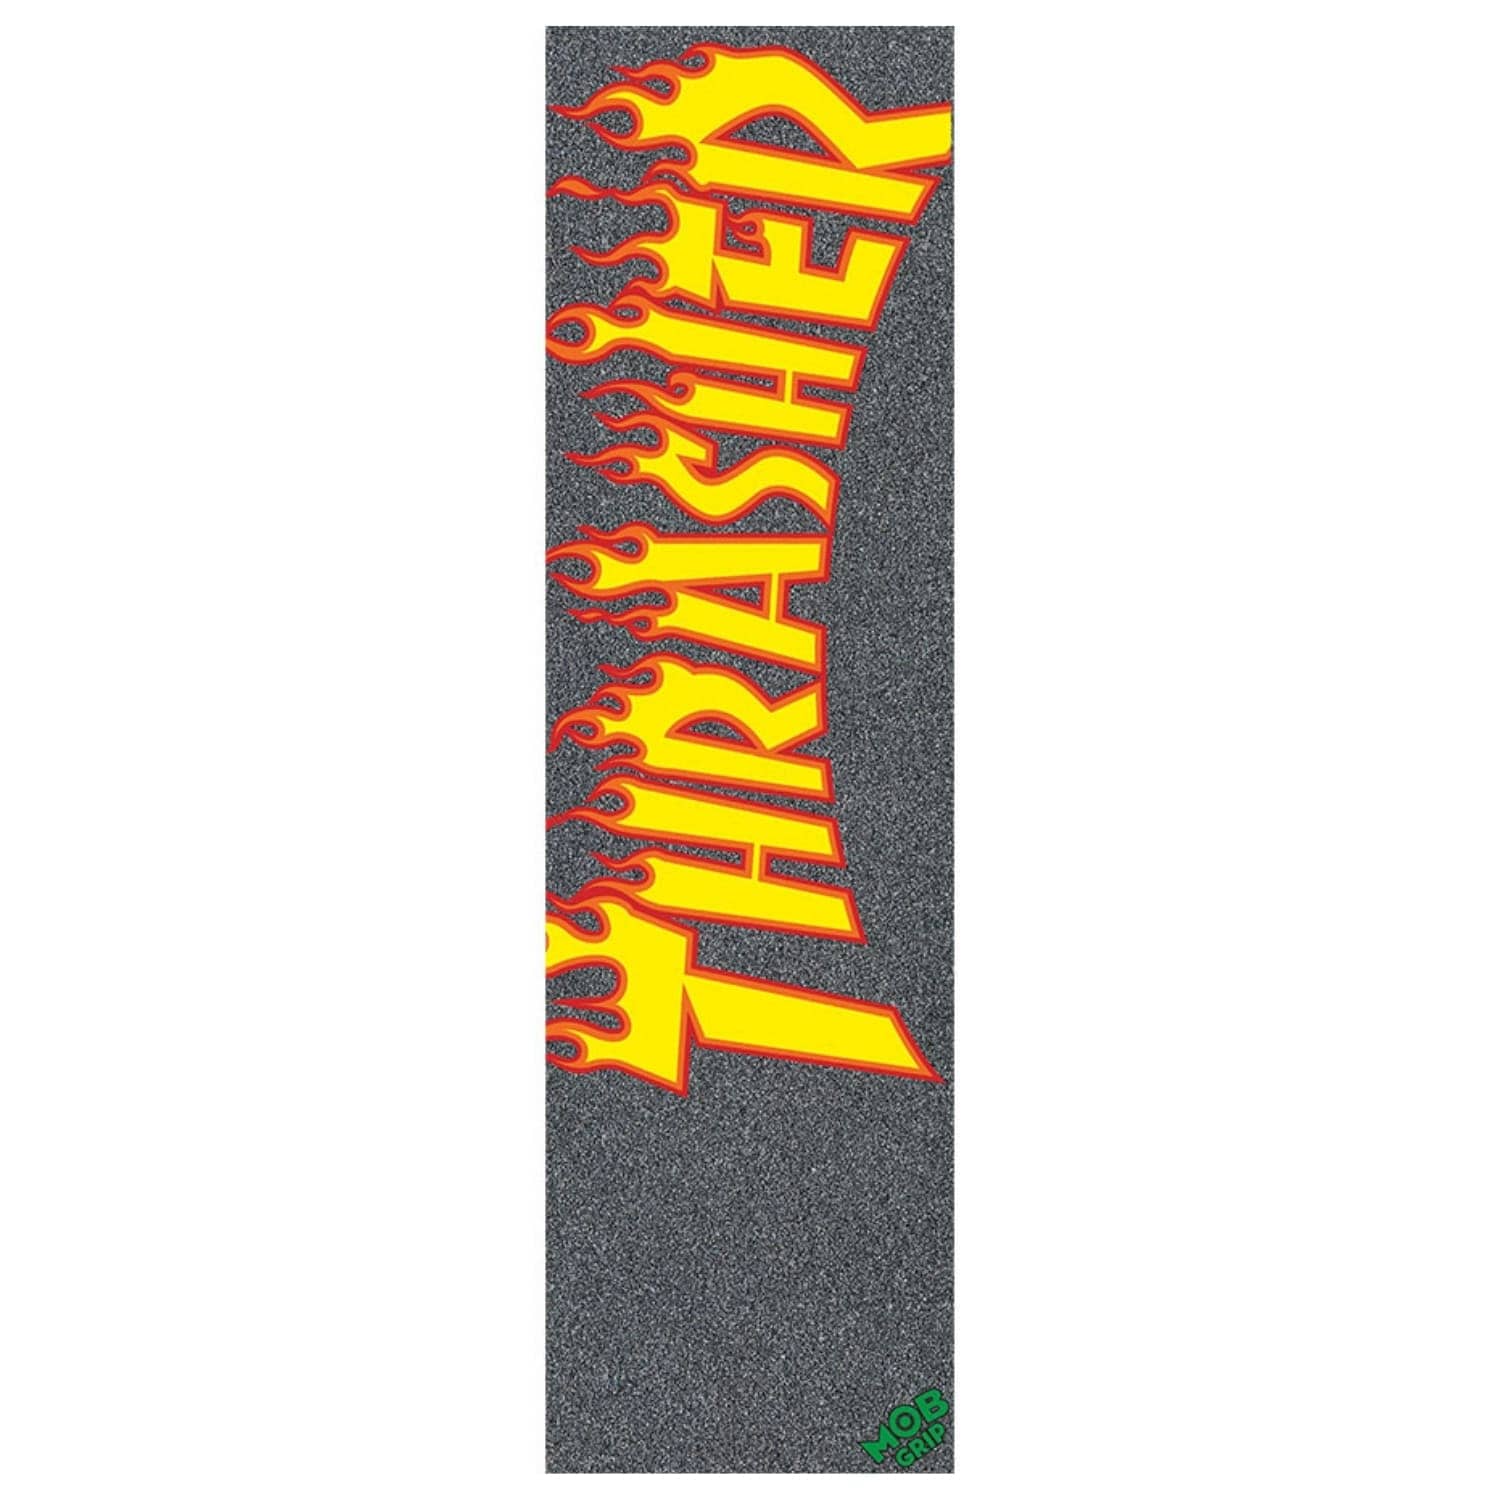 Mob Grip Thrasher Yellow and Orange Flames Griptape Black 9in - Skateboard Grip Tape by Mob Grip